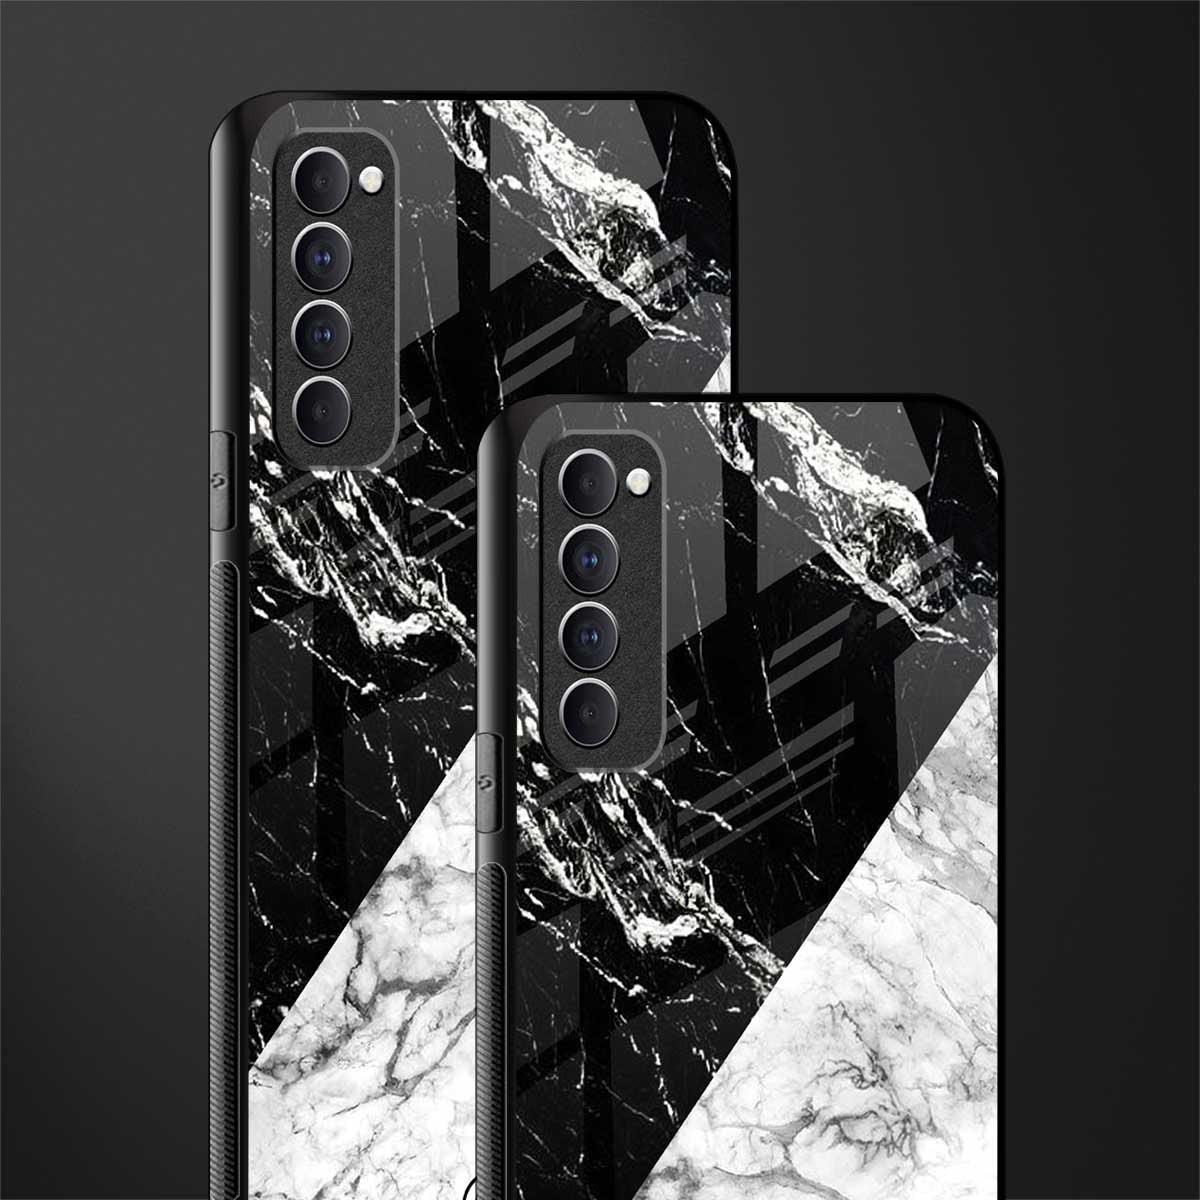 fatal contradiction phone cover for oppo reno 4 pro